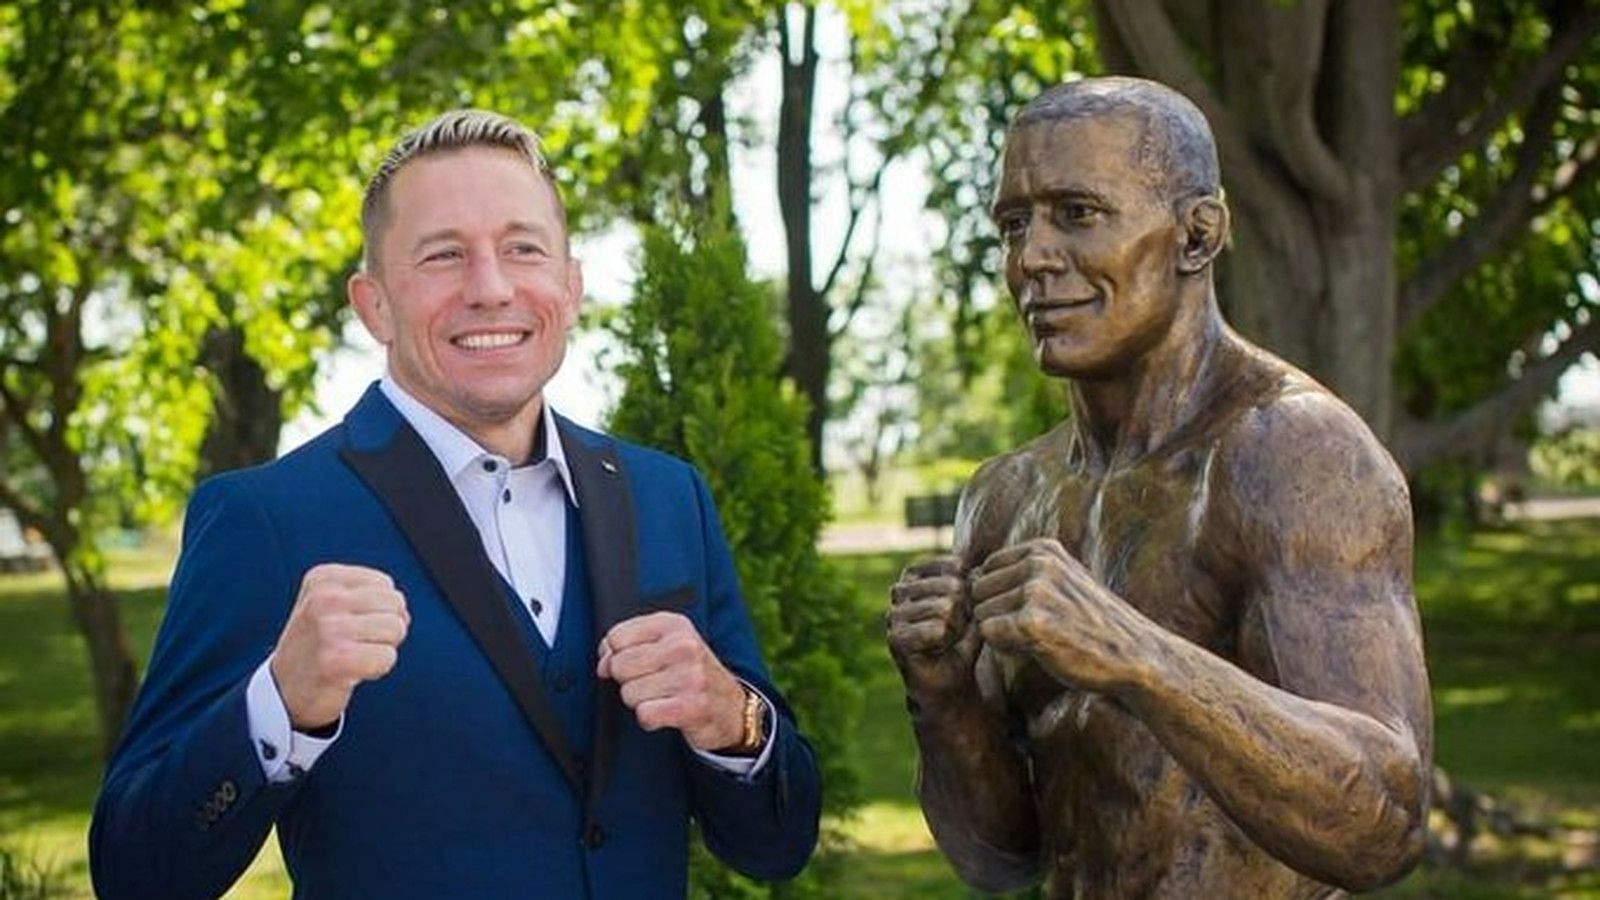 Georges St-Pierre transcended the sport of MMA, becoming a genuine Canadian icon